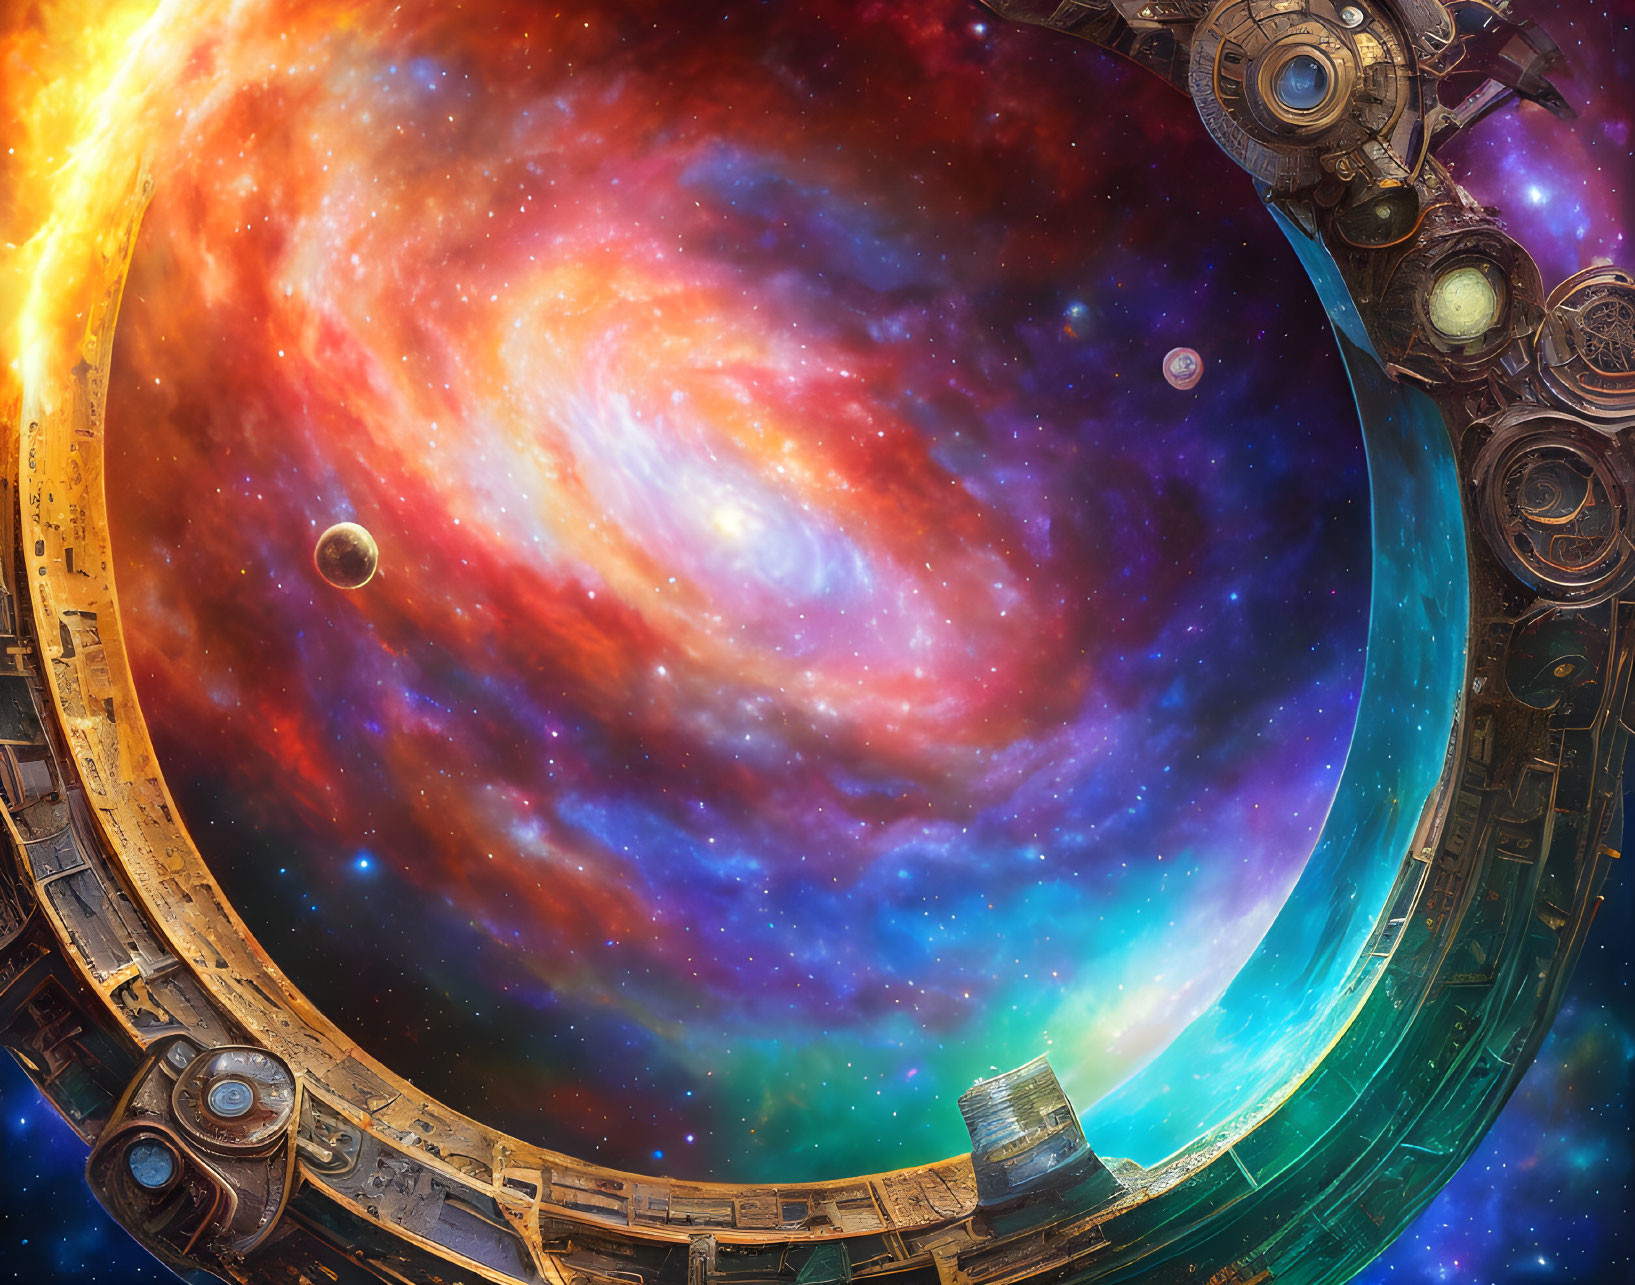 Swirling galaxy and colorful nebulas framed by steampunk-style structure